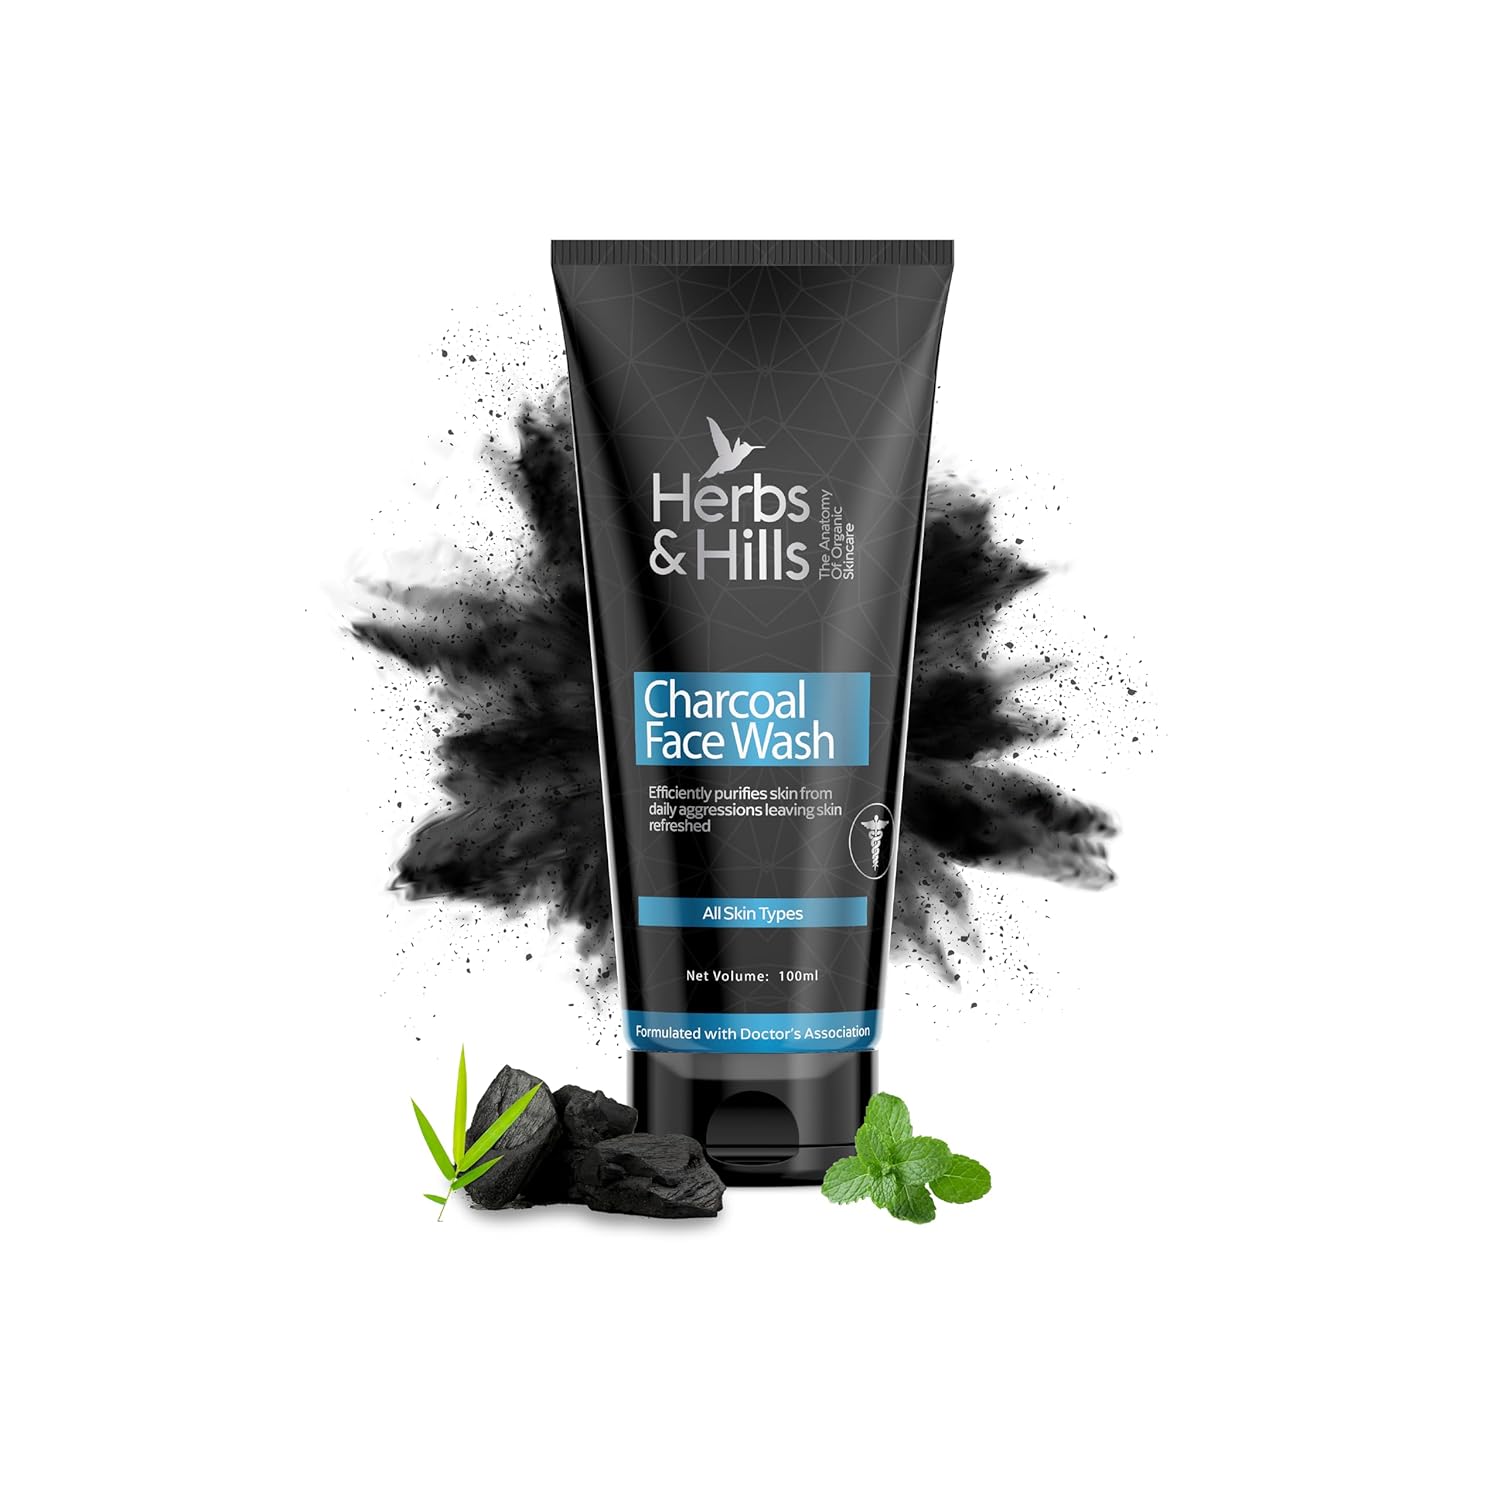 Herbs & Hills Charcoal Face Wash - 100ml | Anti Pollution | Oil Control | For Dirt & Dullness | Clogged Pores | Purifies Skin | with Coconut Oil, Aloe Vera & Lemon Oil Extract